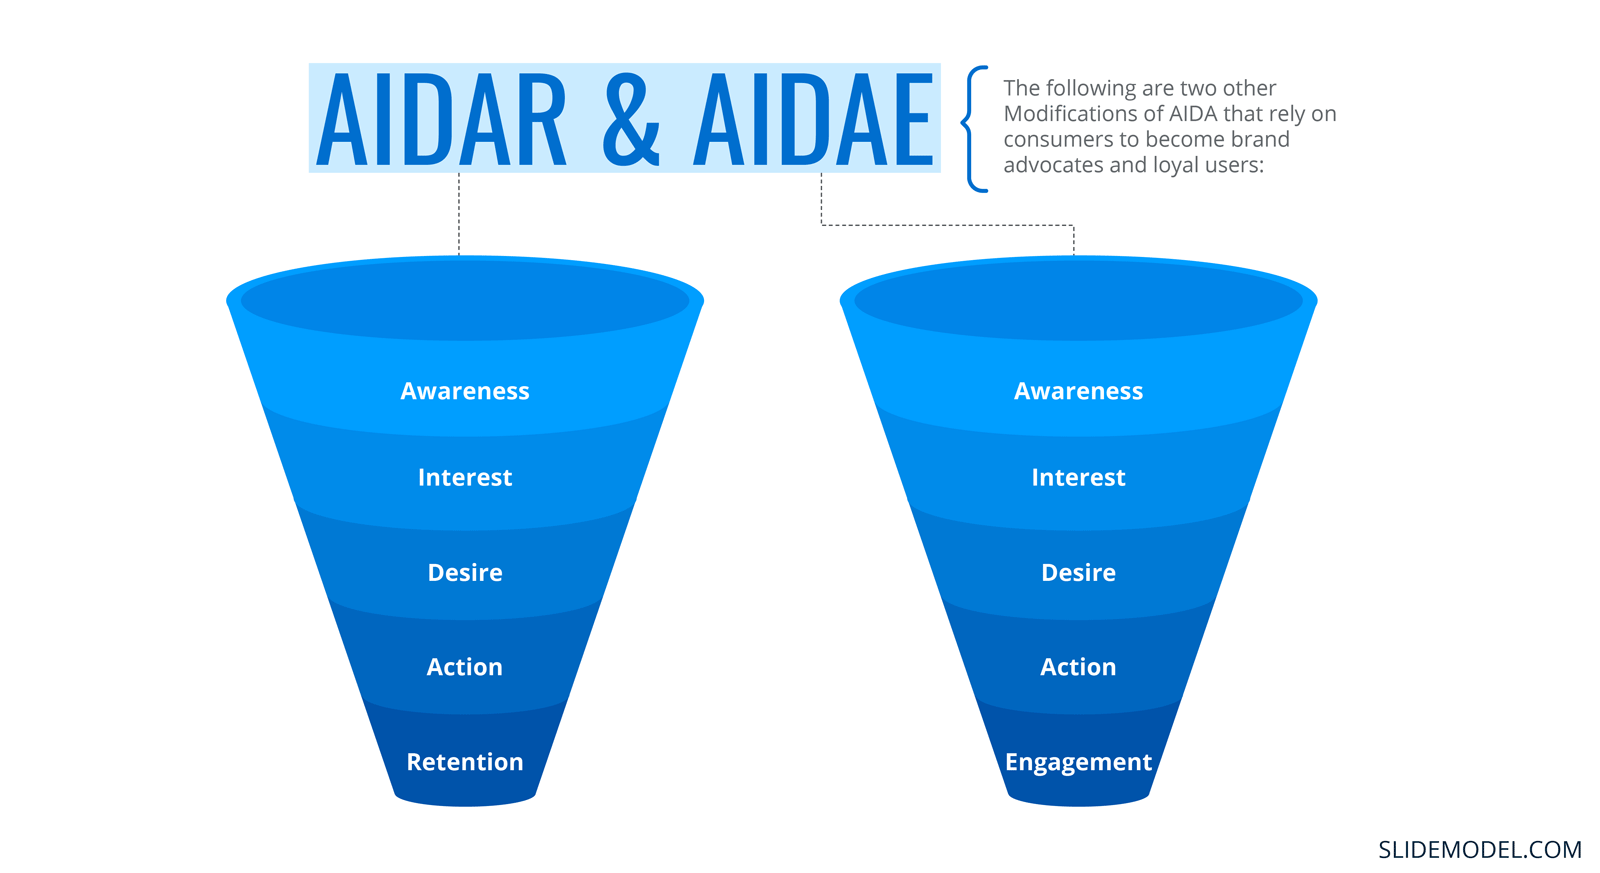 AIDAR and AIDAE Model Slide Design - Example of funnel templates showing AIDAR and AIDAE